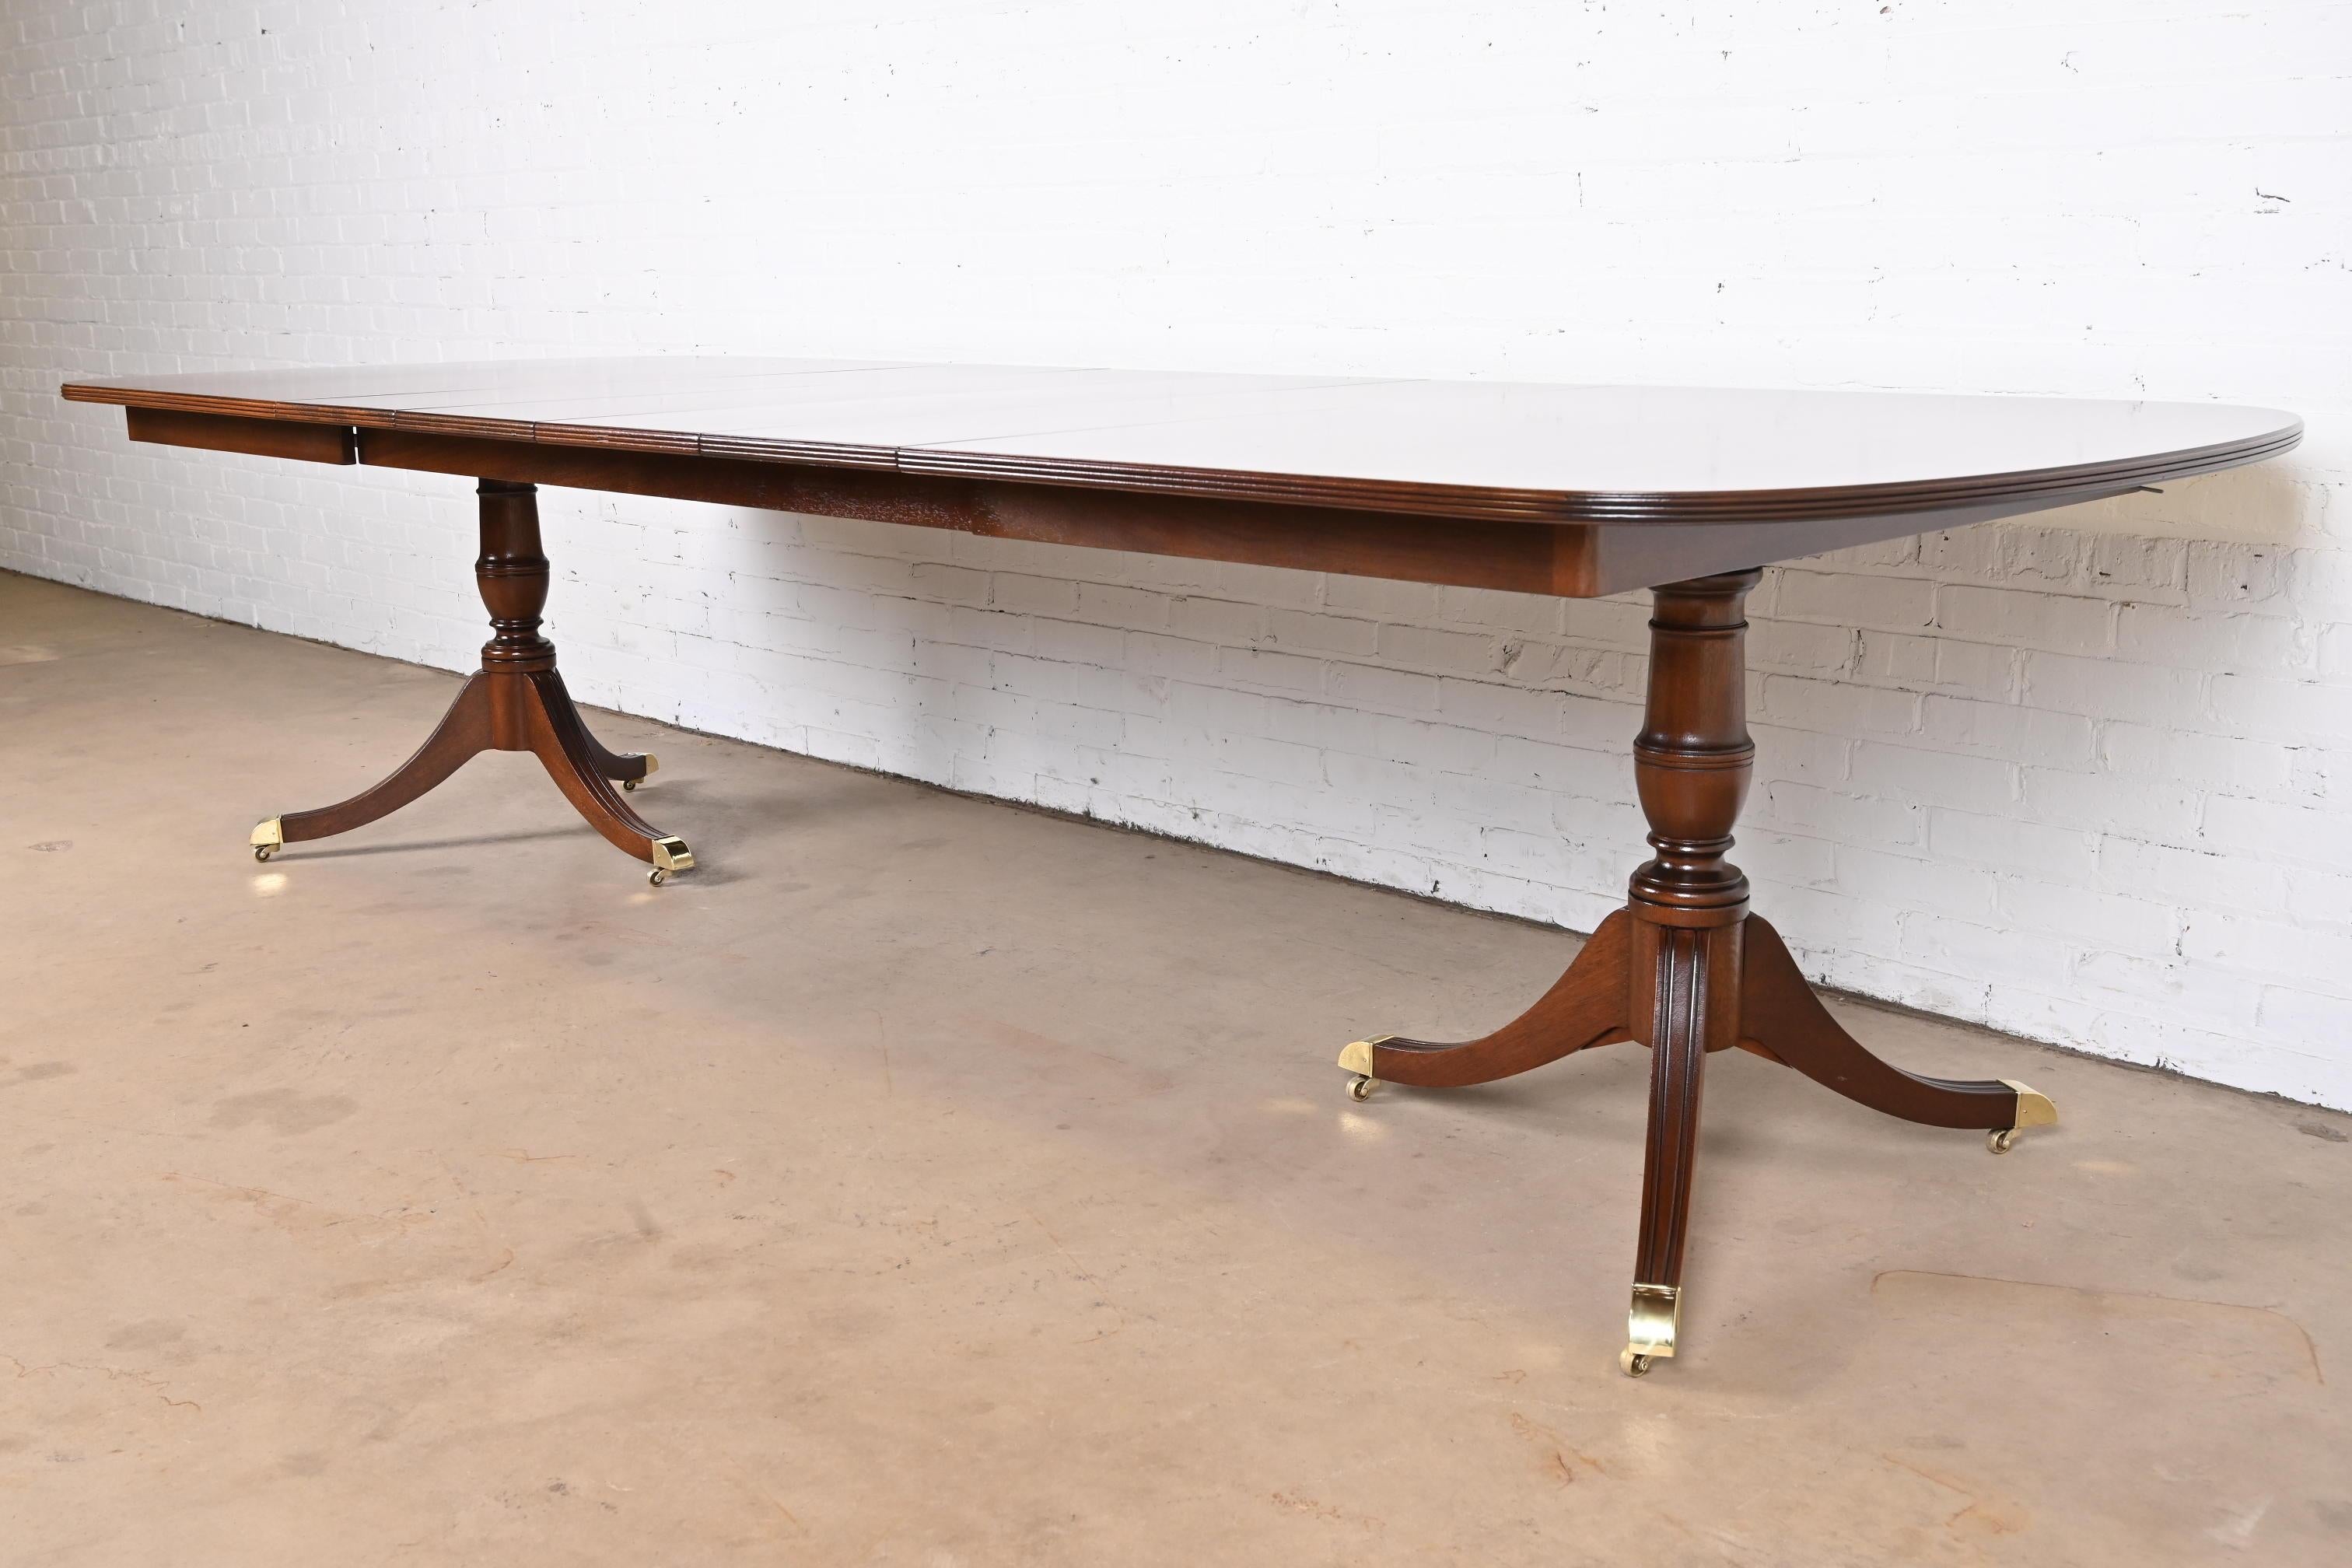 20th Century Kindel Furniture Georgian Flame Mahogany Double Pedestal Extension Dining Table